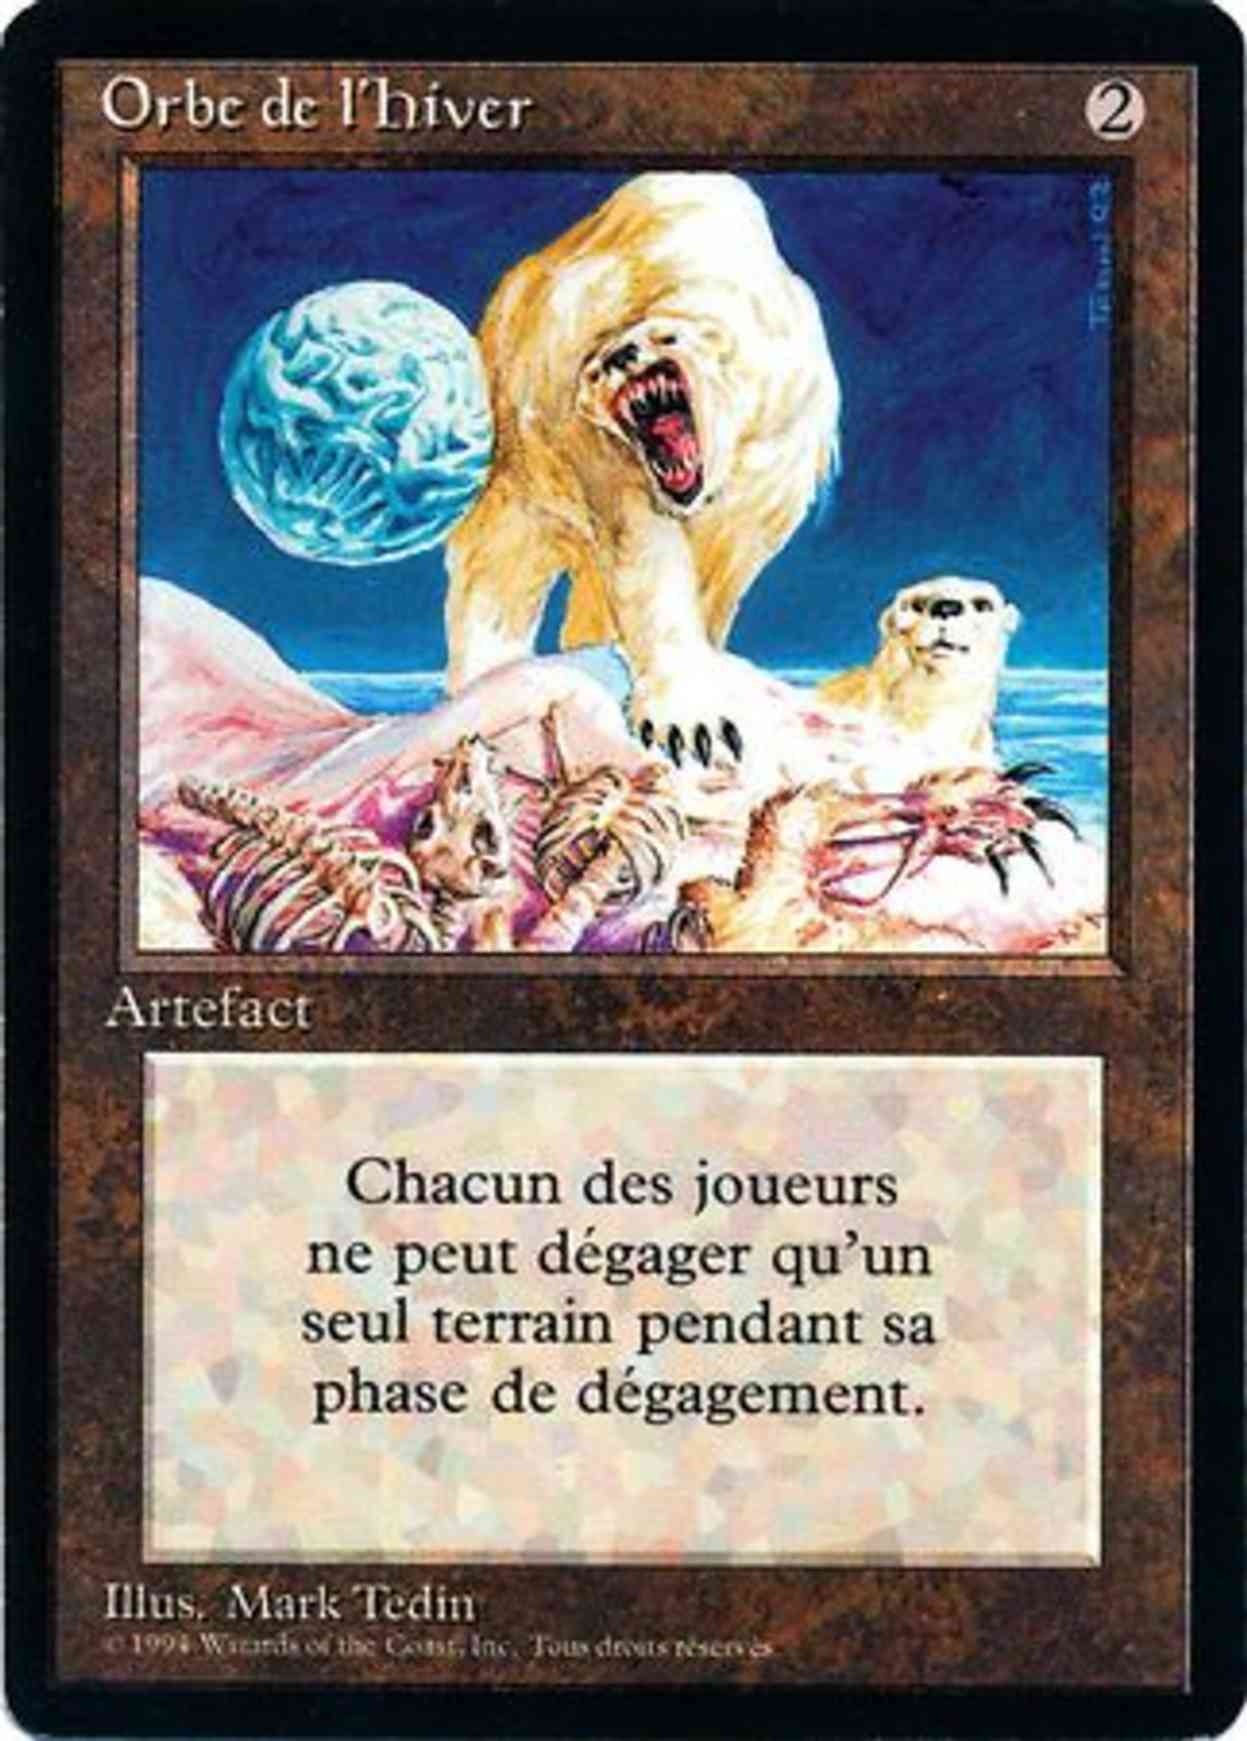 Winter Orb magic card front